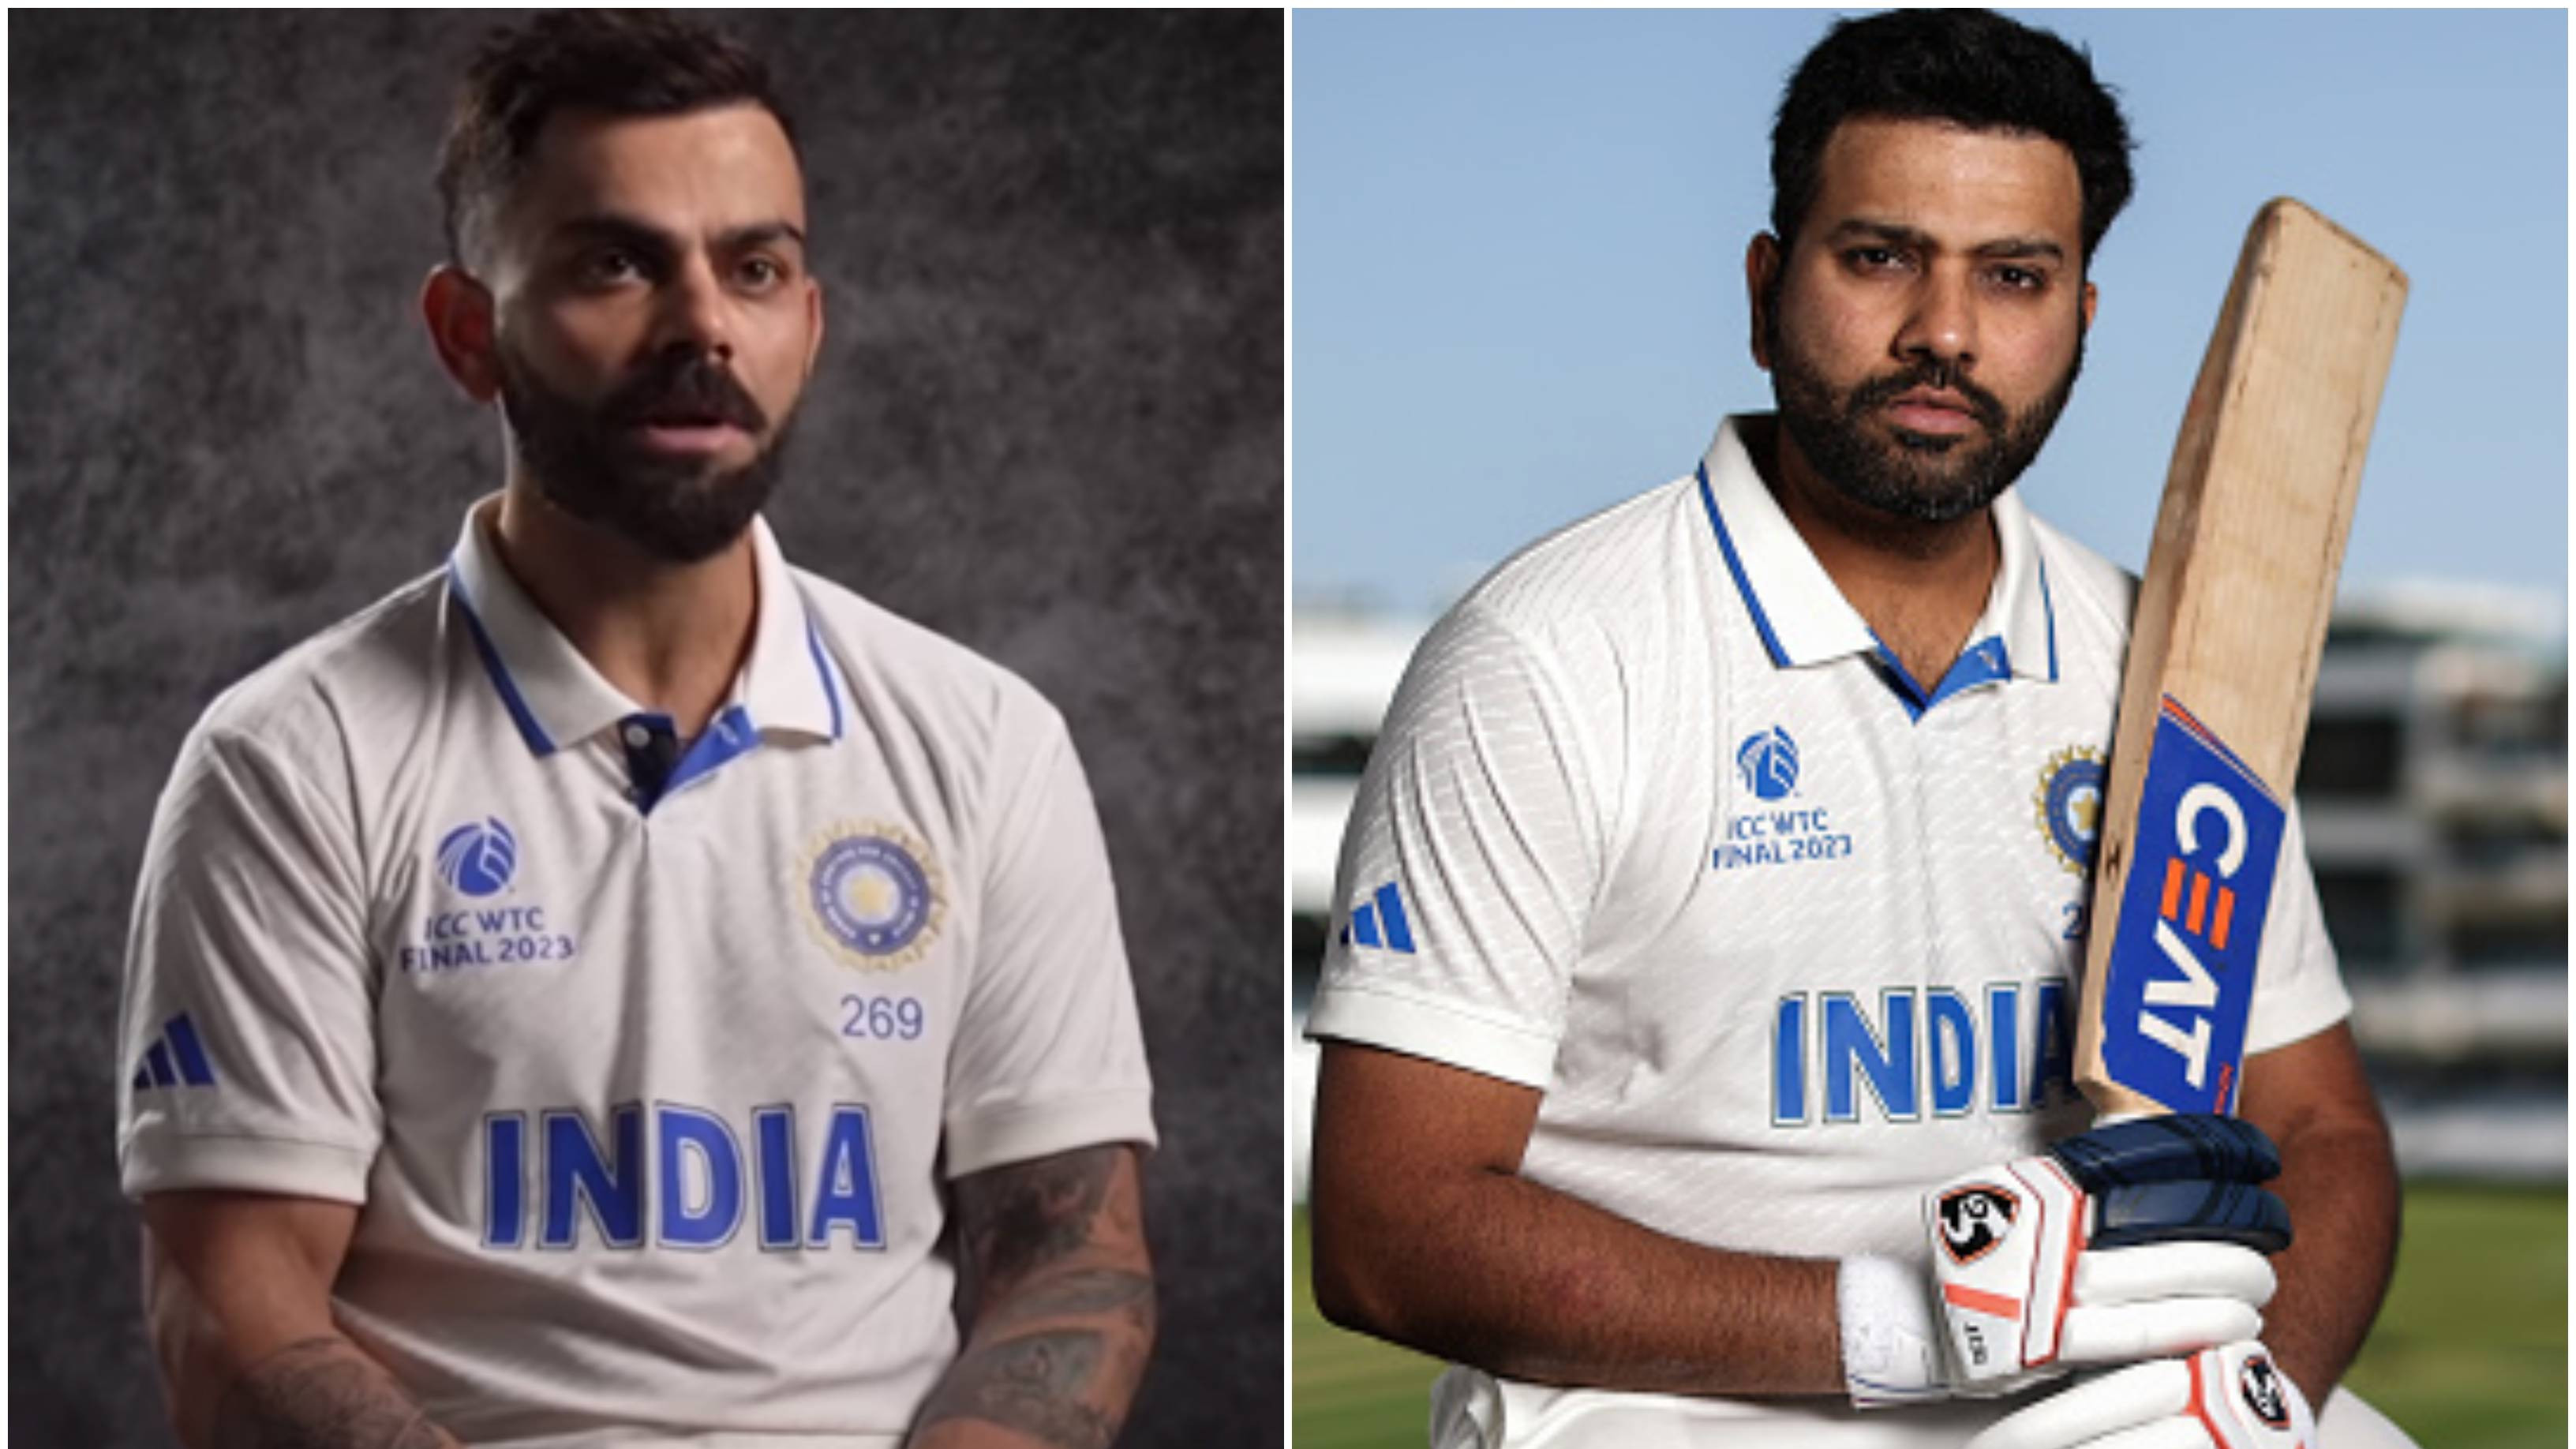 WATCH: “The way he performed in Tests in last few years…,” Kohli lauds Rohit’s brilliance as opener in red-ball cricket